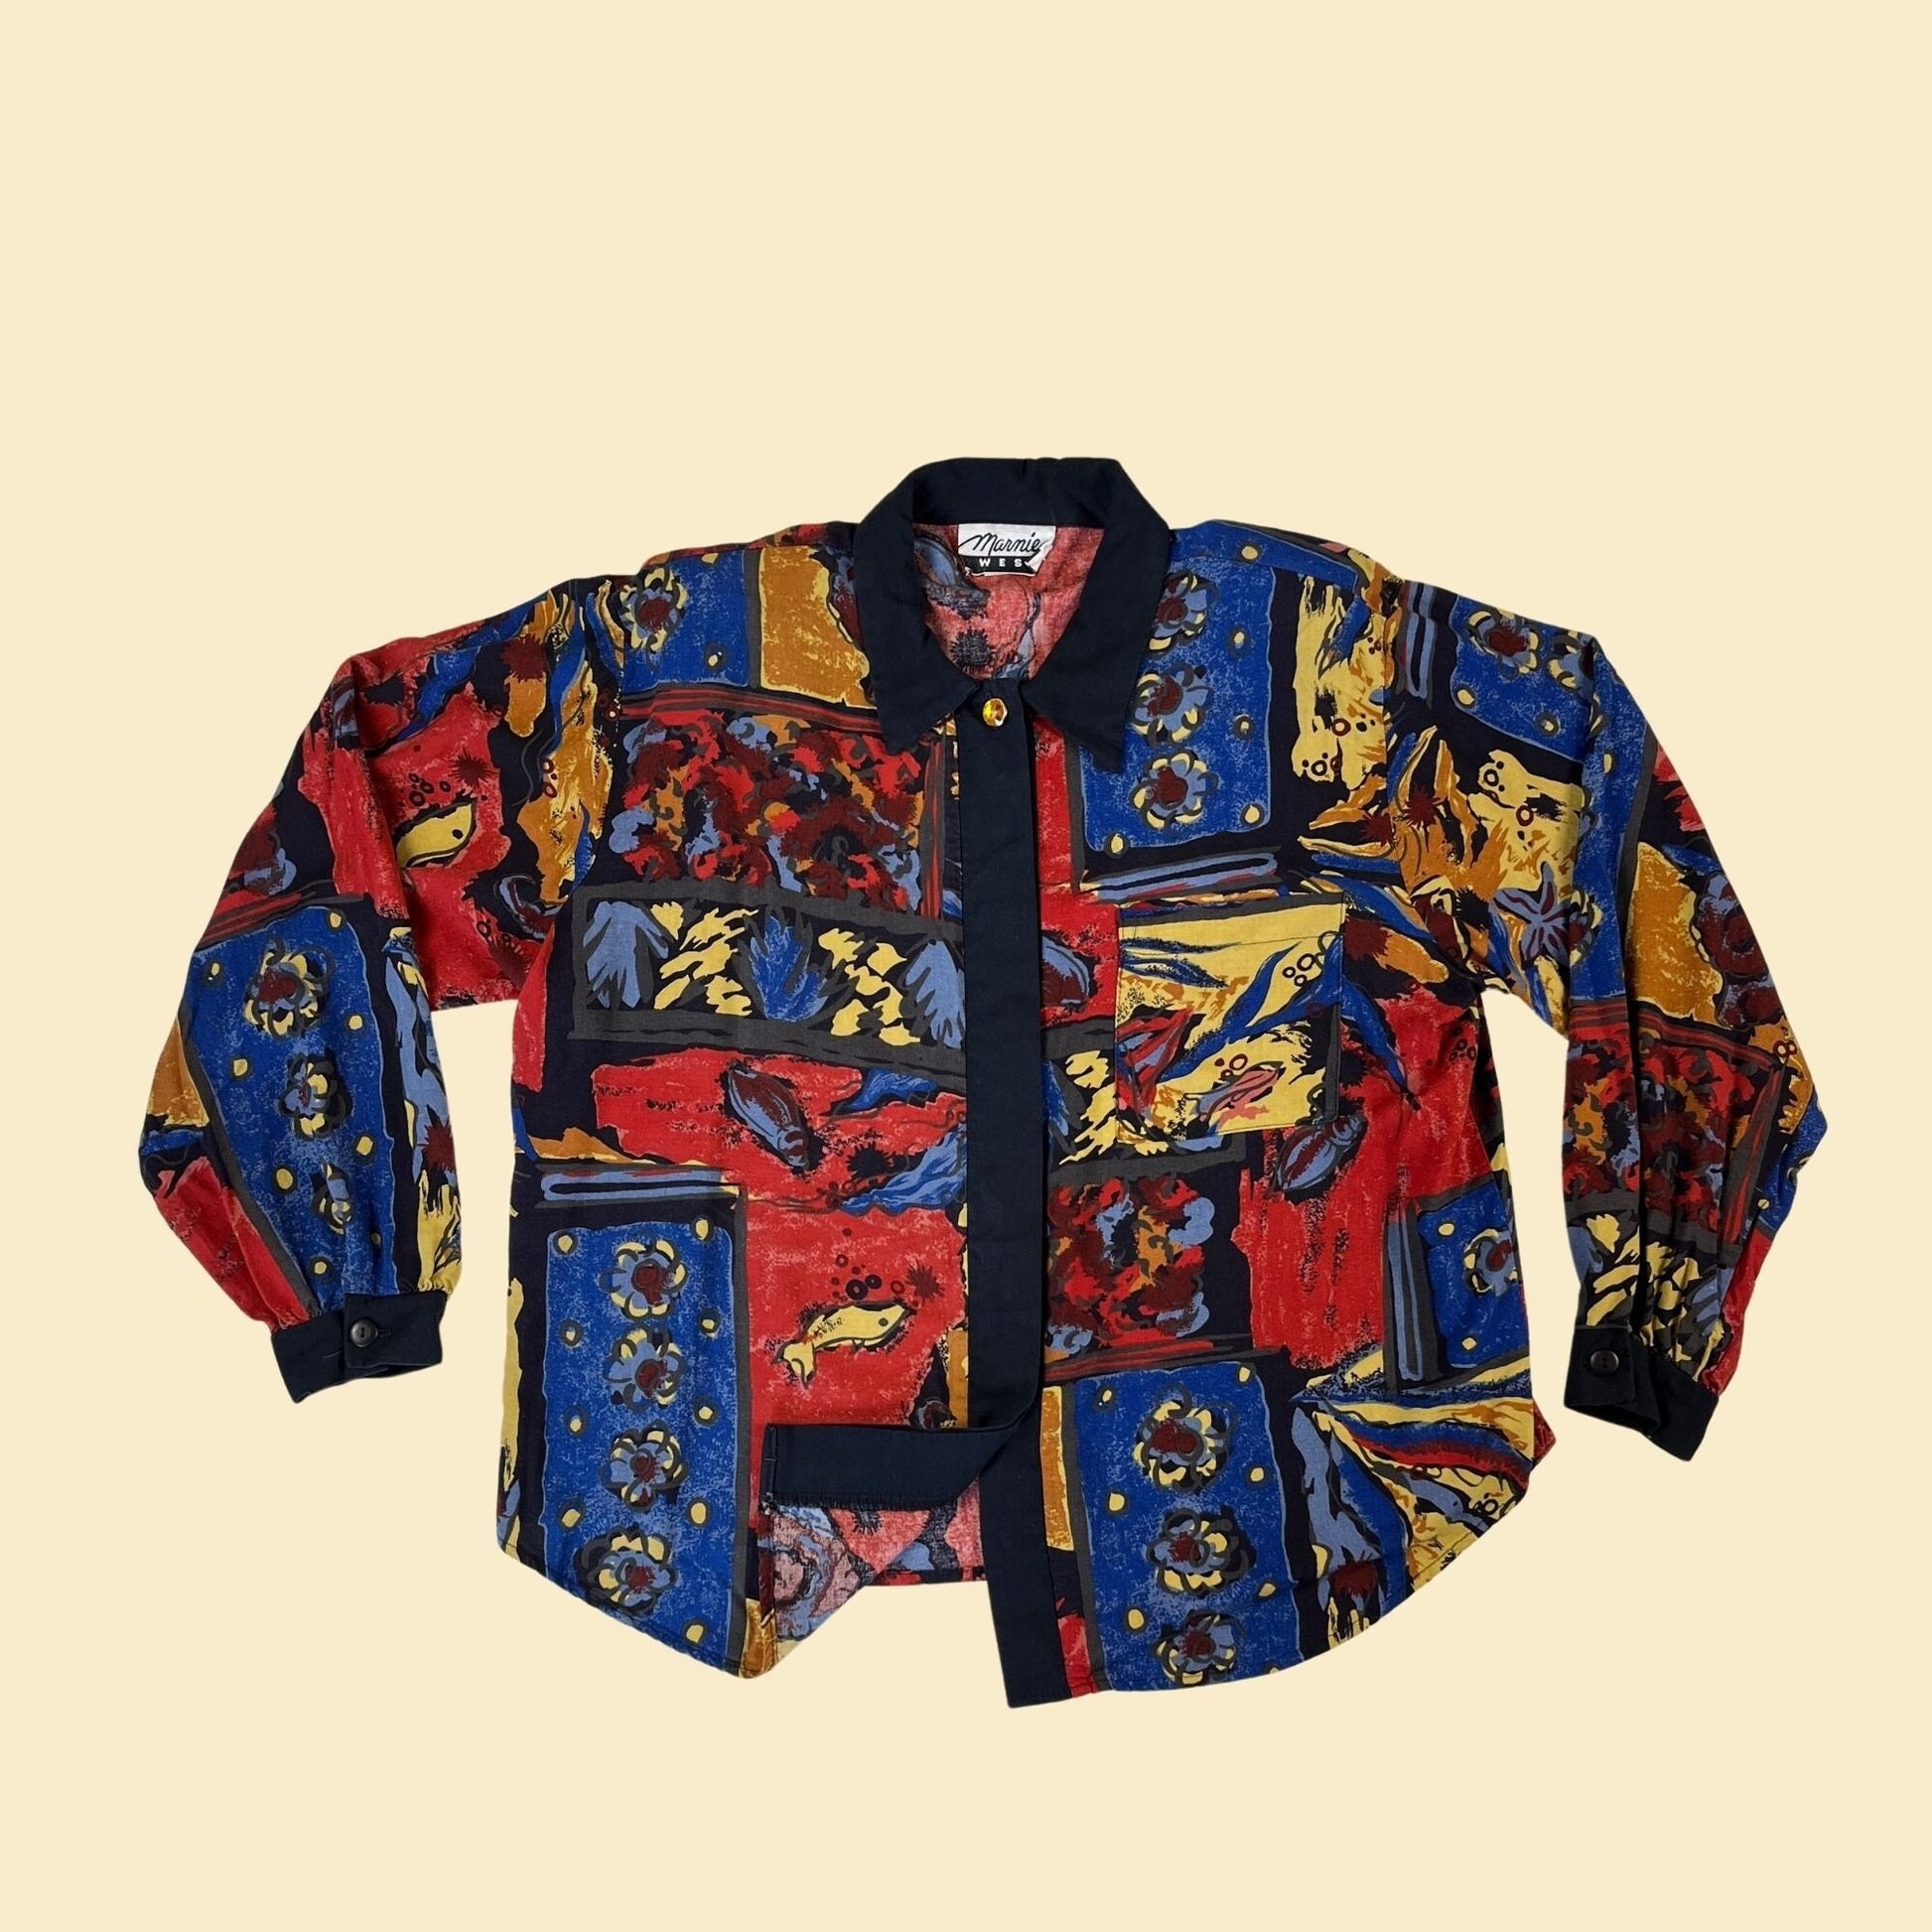 80s abstract blouse by Marnie West, vintage red, blue & yellow size L women's button down shirt w/ shoulder pads